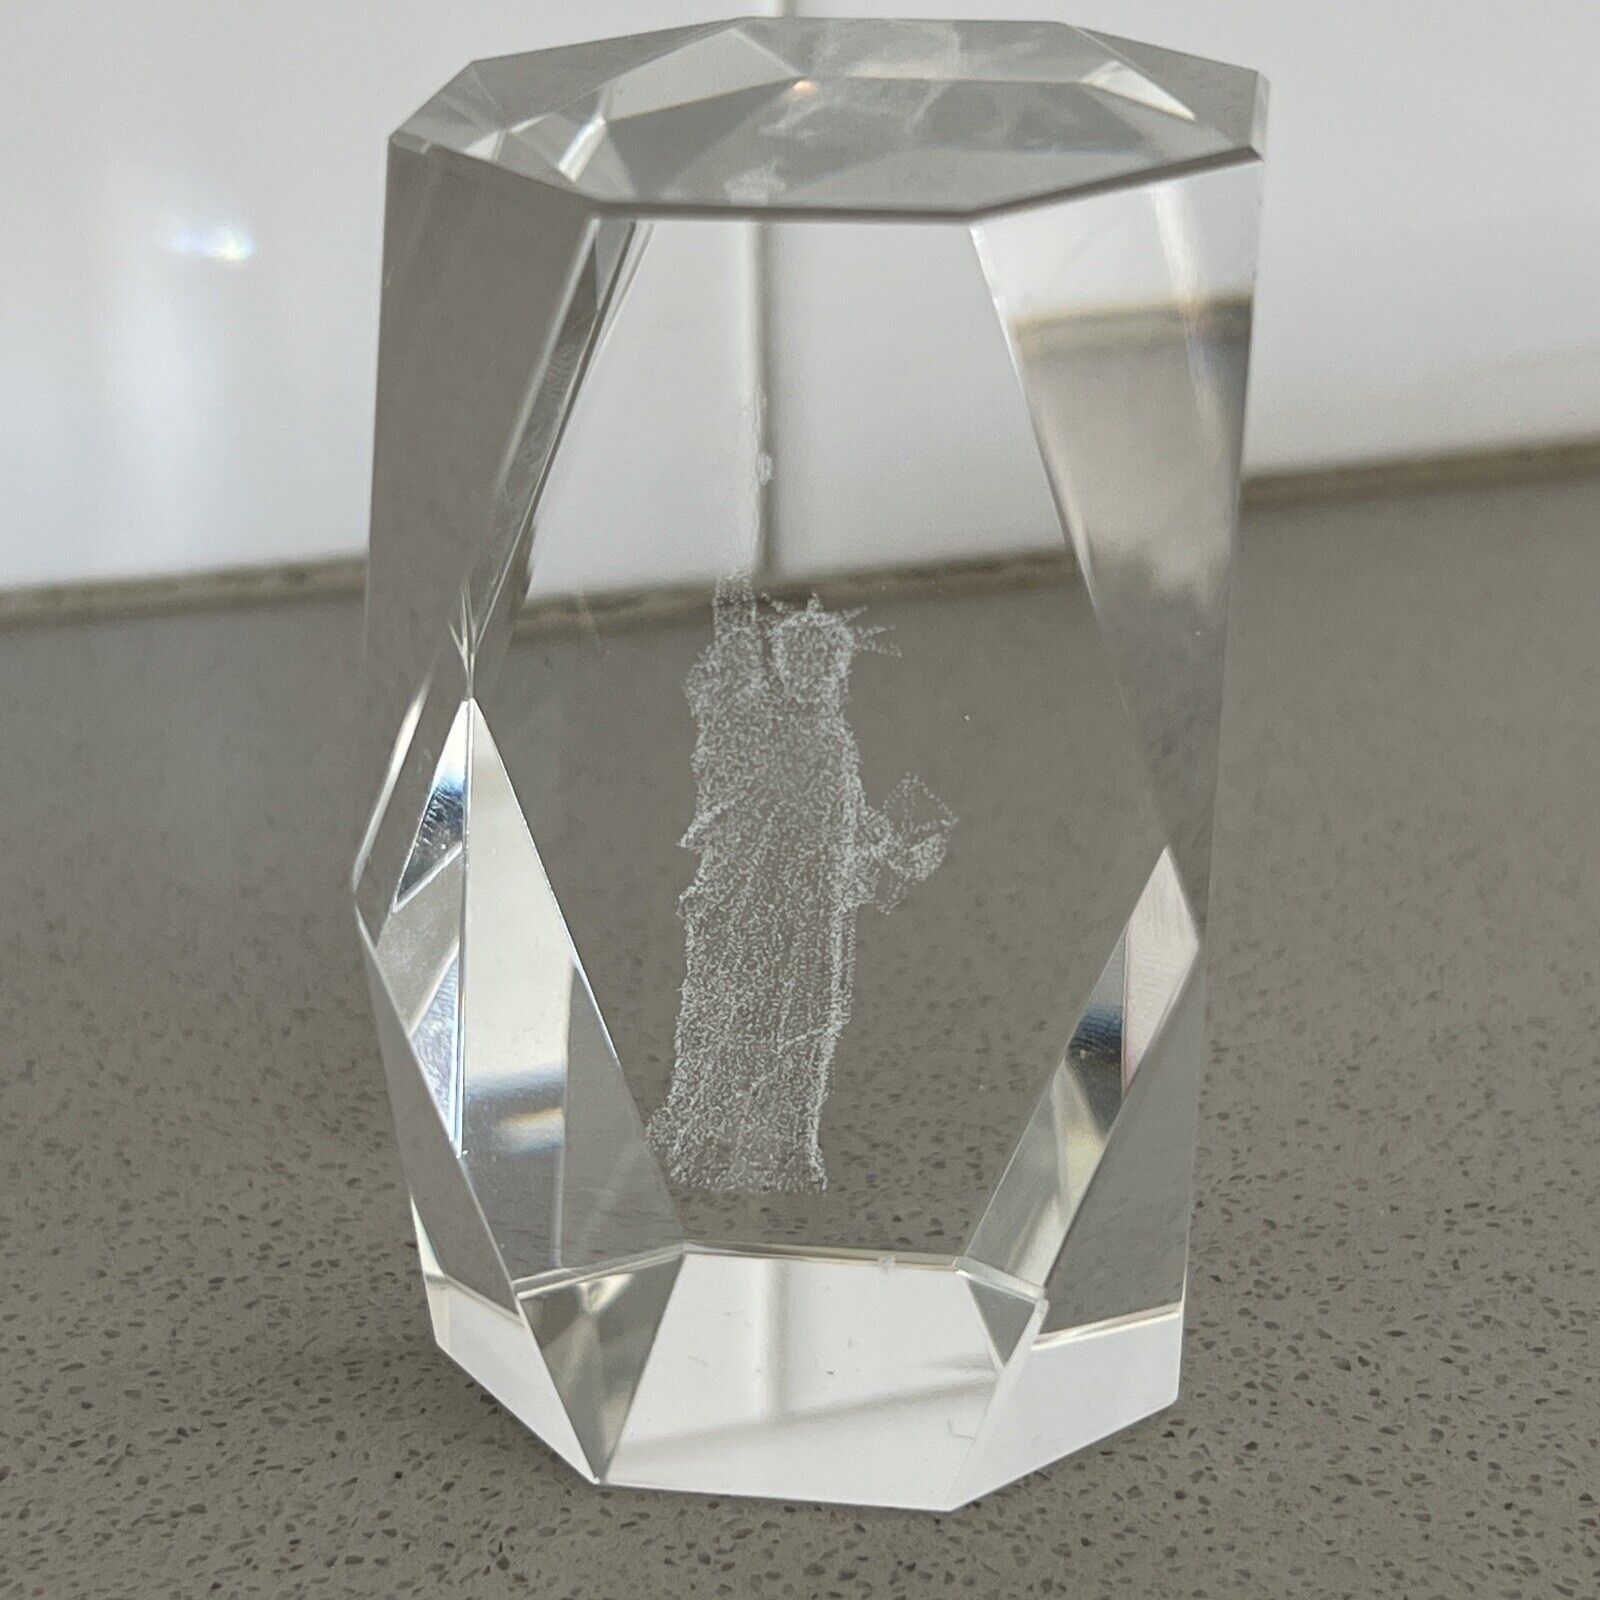 3D Laser Etched Crystal Statue Of Liberty Glass Paperweight Cube Design 3” 1lb